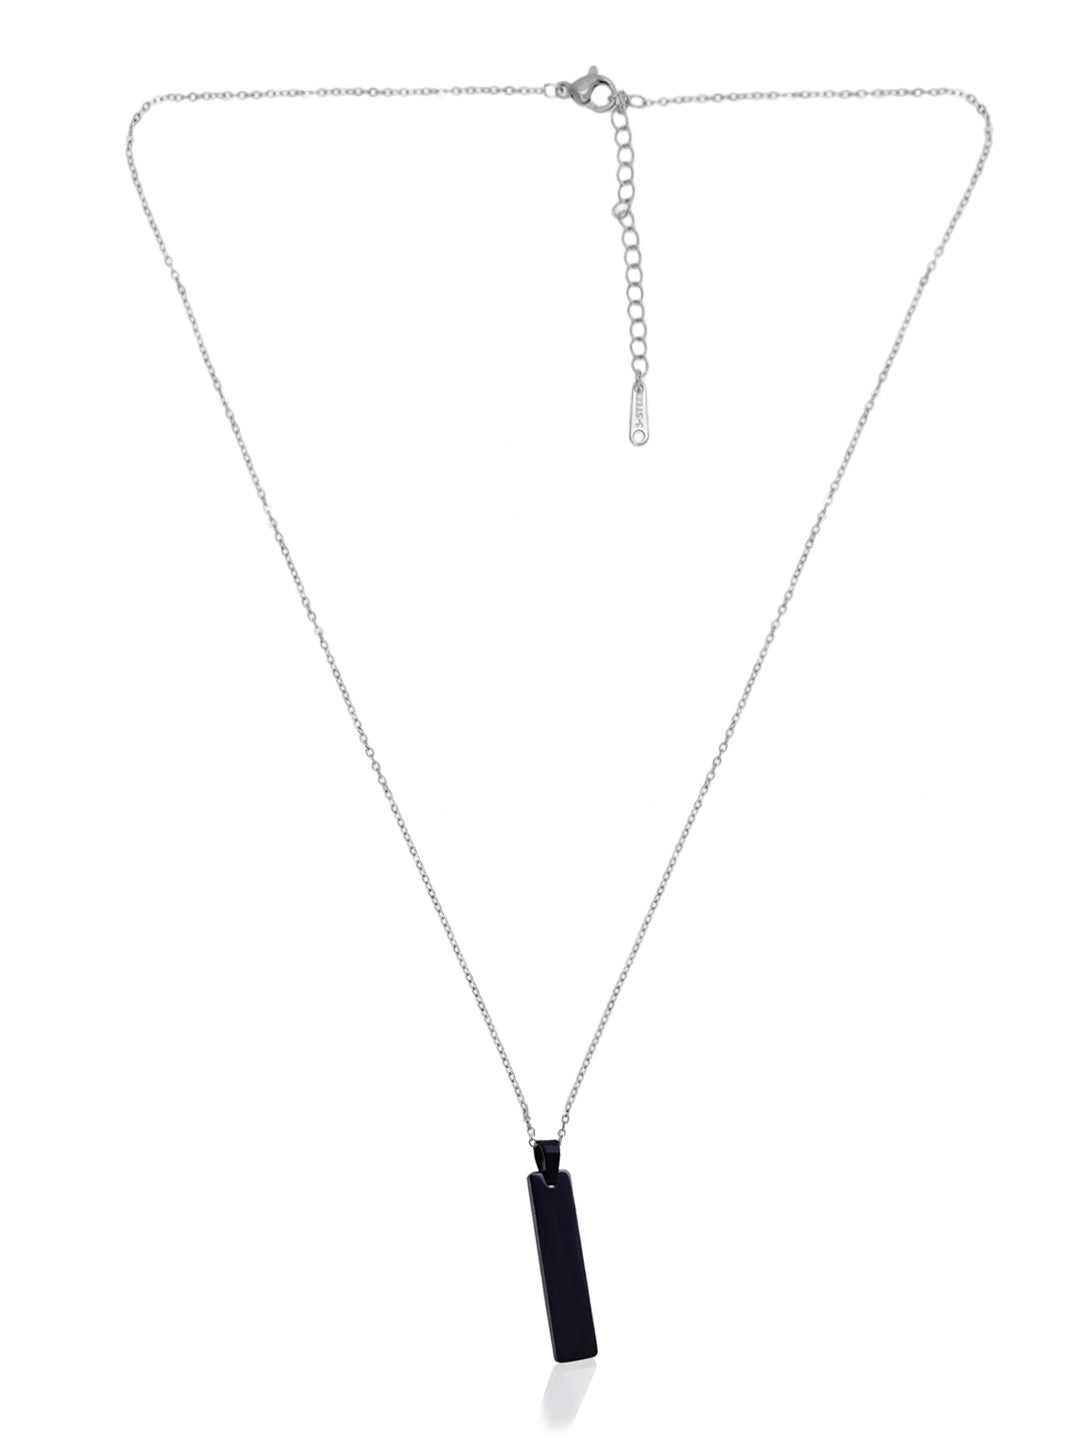 Black Stainless Steel Vertical Bar Pendant adjustable Necklace chain